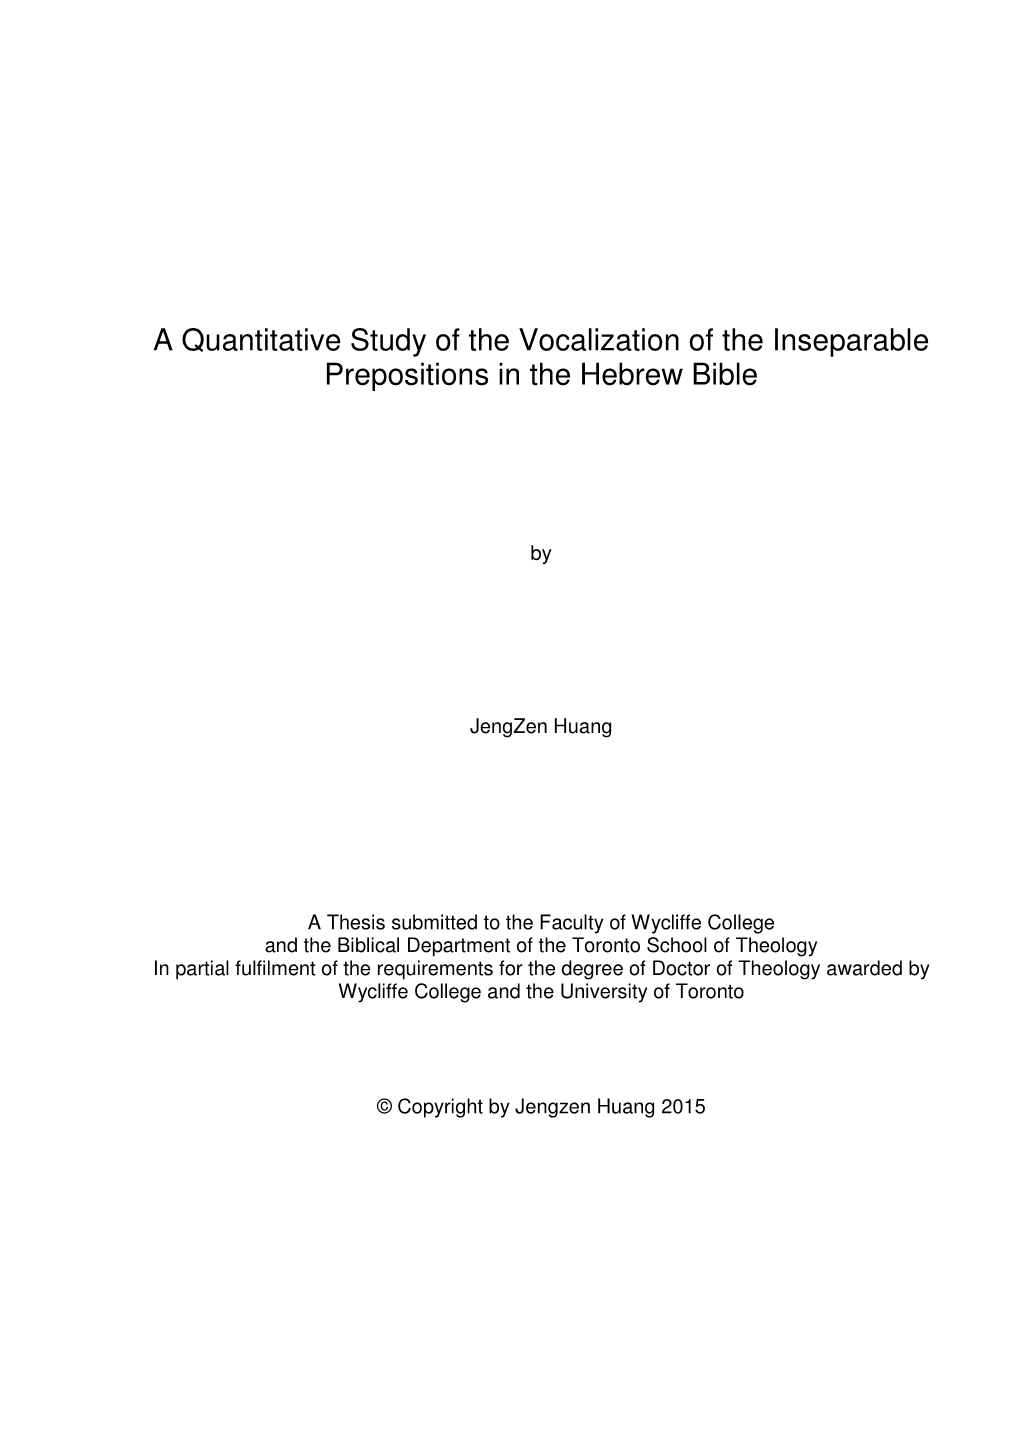 A Quantitative Study of the Vocalization of the Inseparable Prepositions in the Hebrew Bible